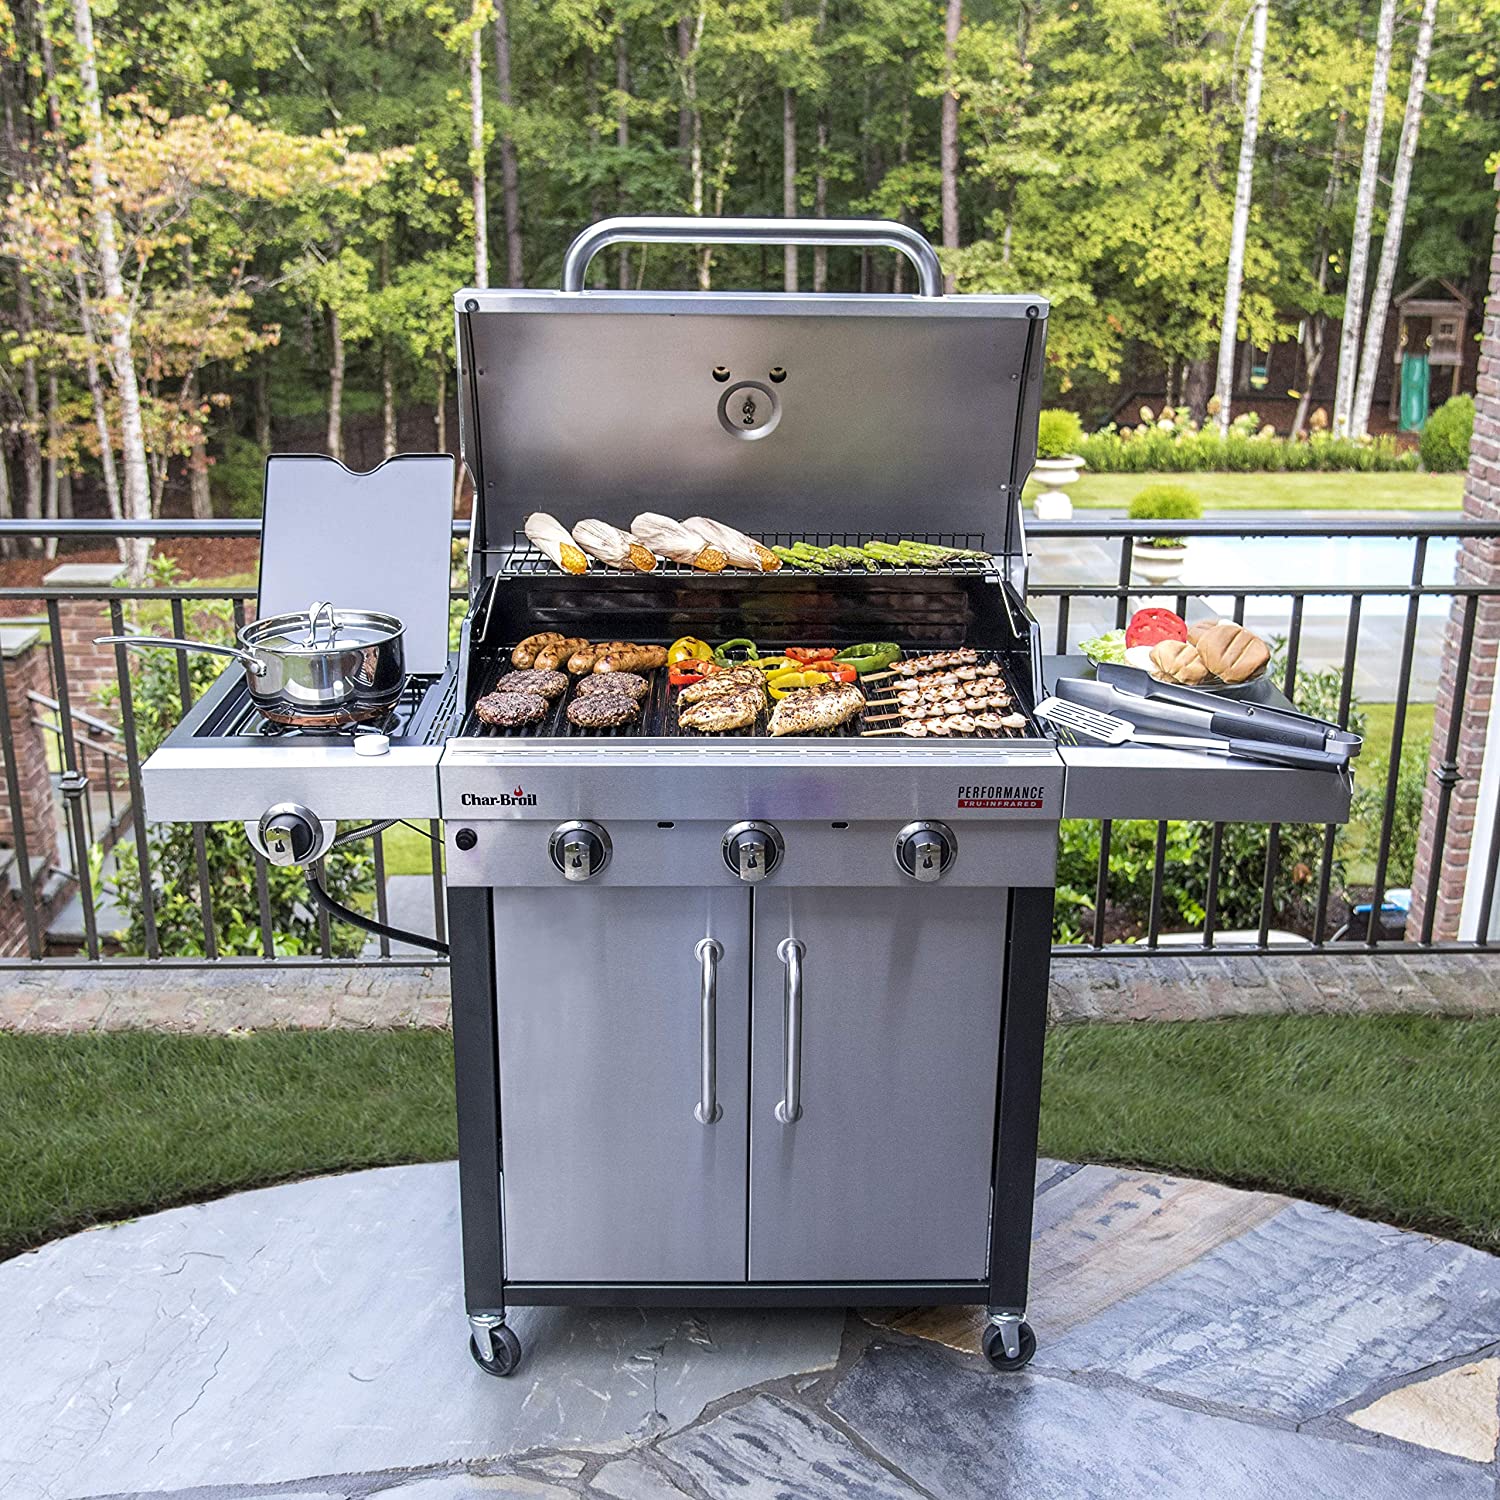 Char-Broil Performance Series™ TRU-Infrared™ 3-Burner Gas Grill - image 5 of 6